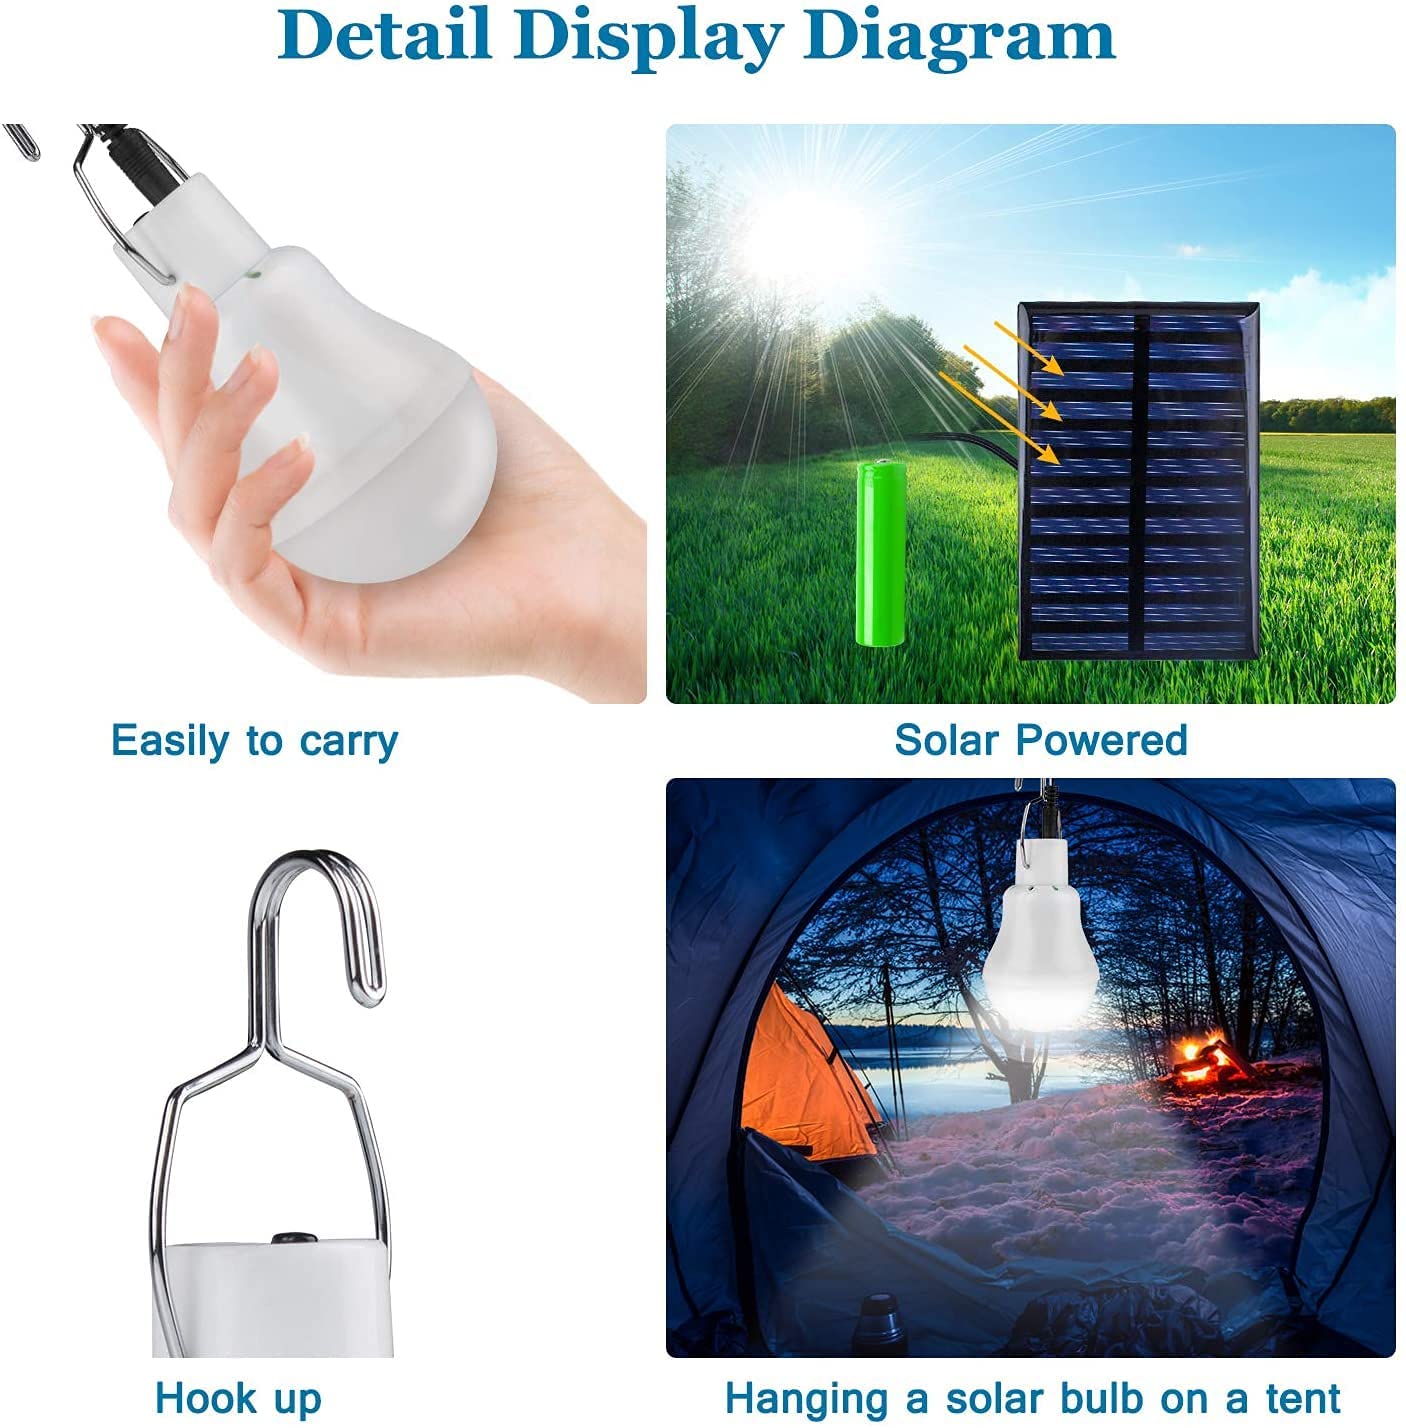 LED Solar Bulb Light Waterproof Outdoor 5V USB Charged Hanging Emergency Sunlight Powered Lamp Portable Powerful Indoor House